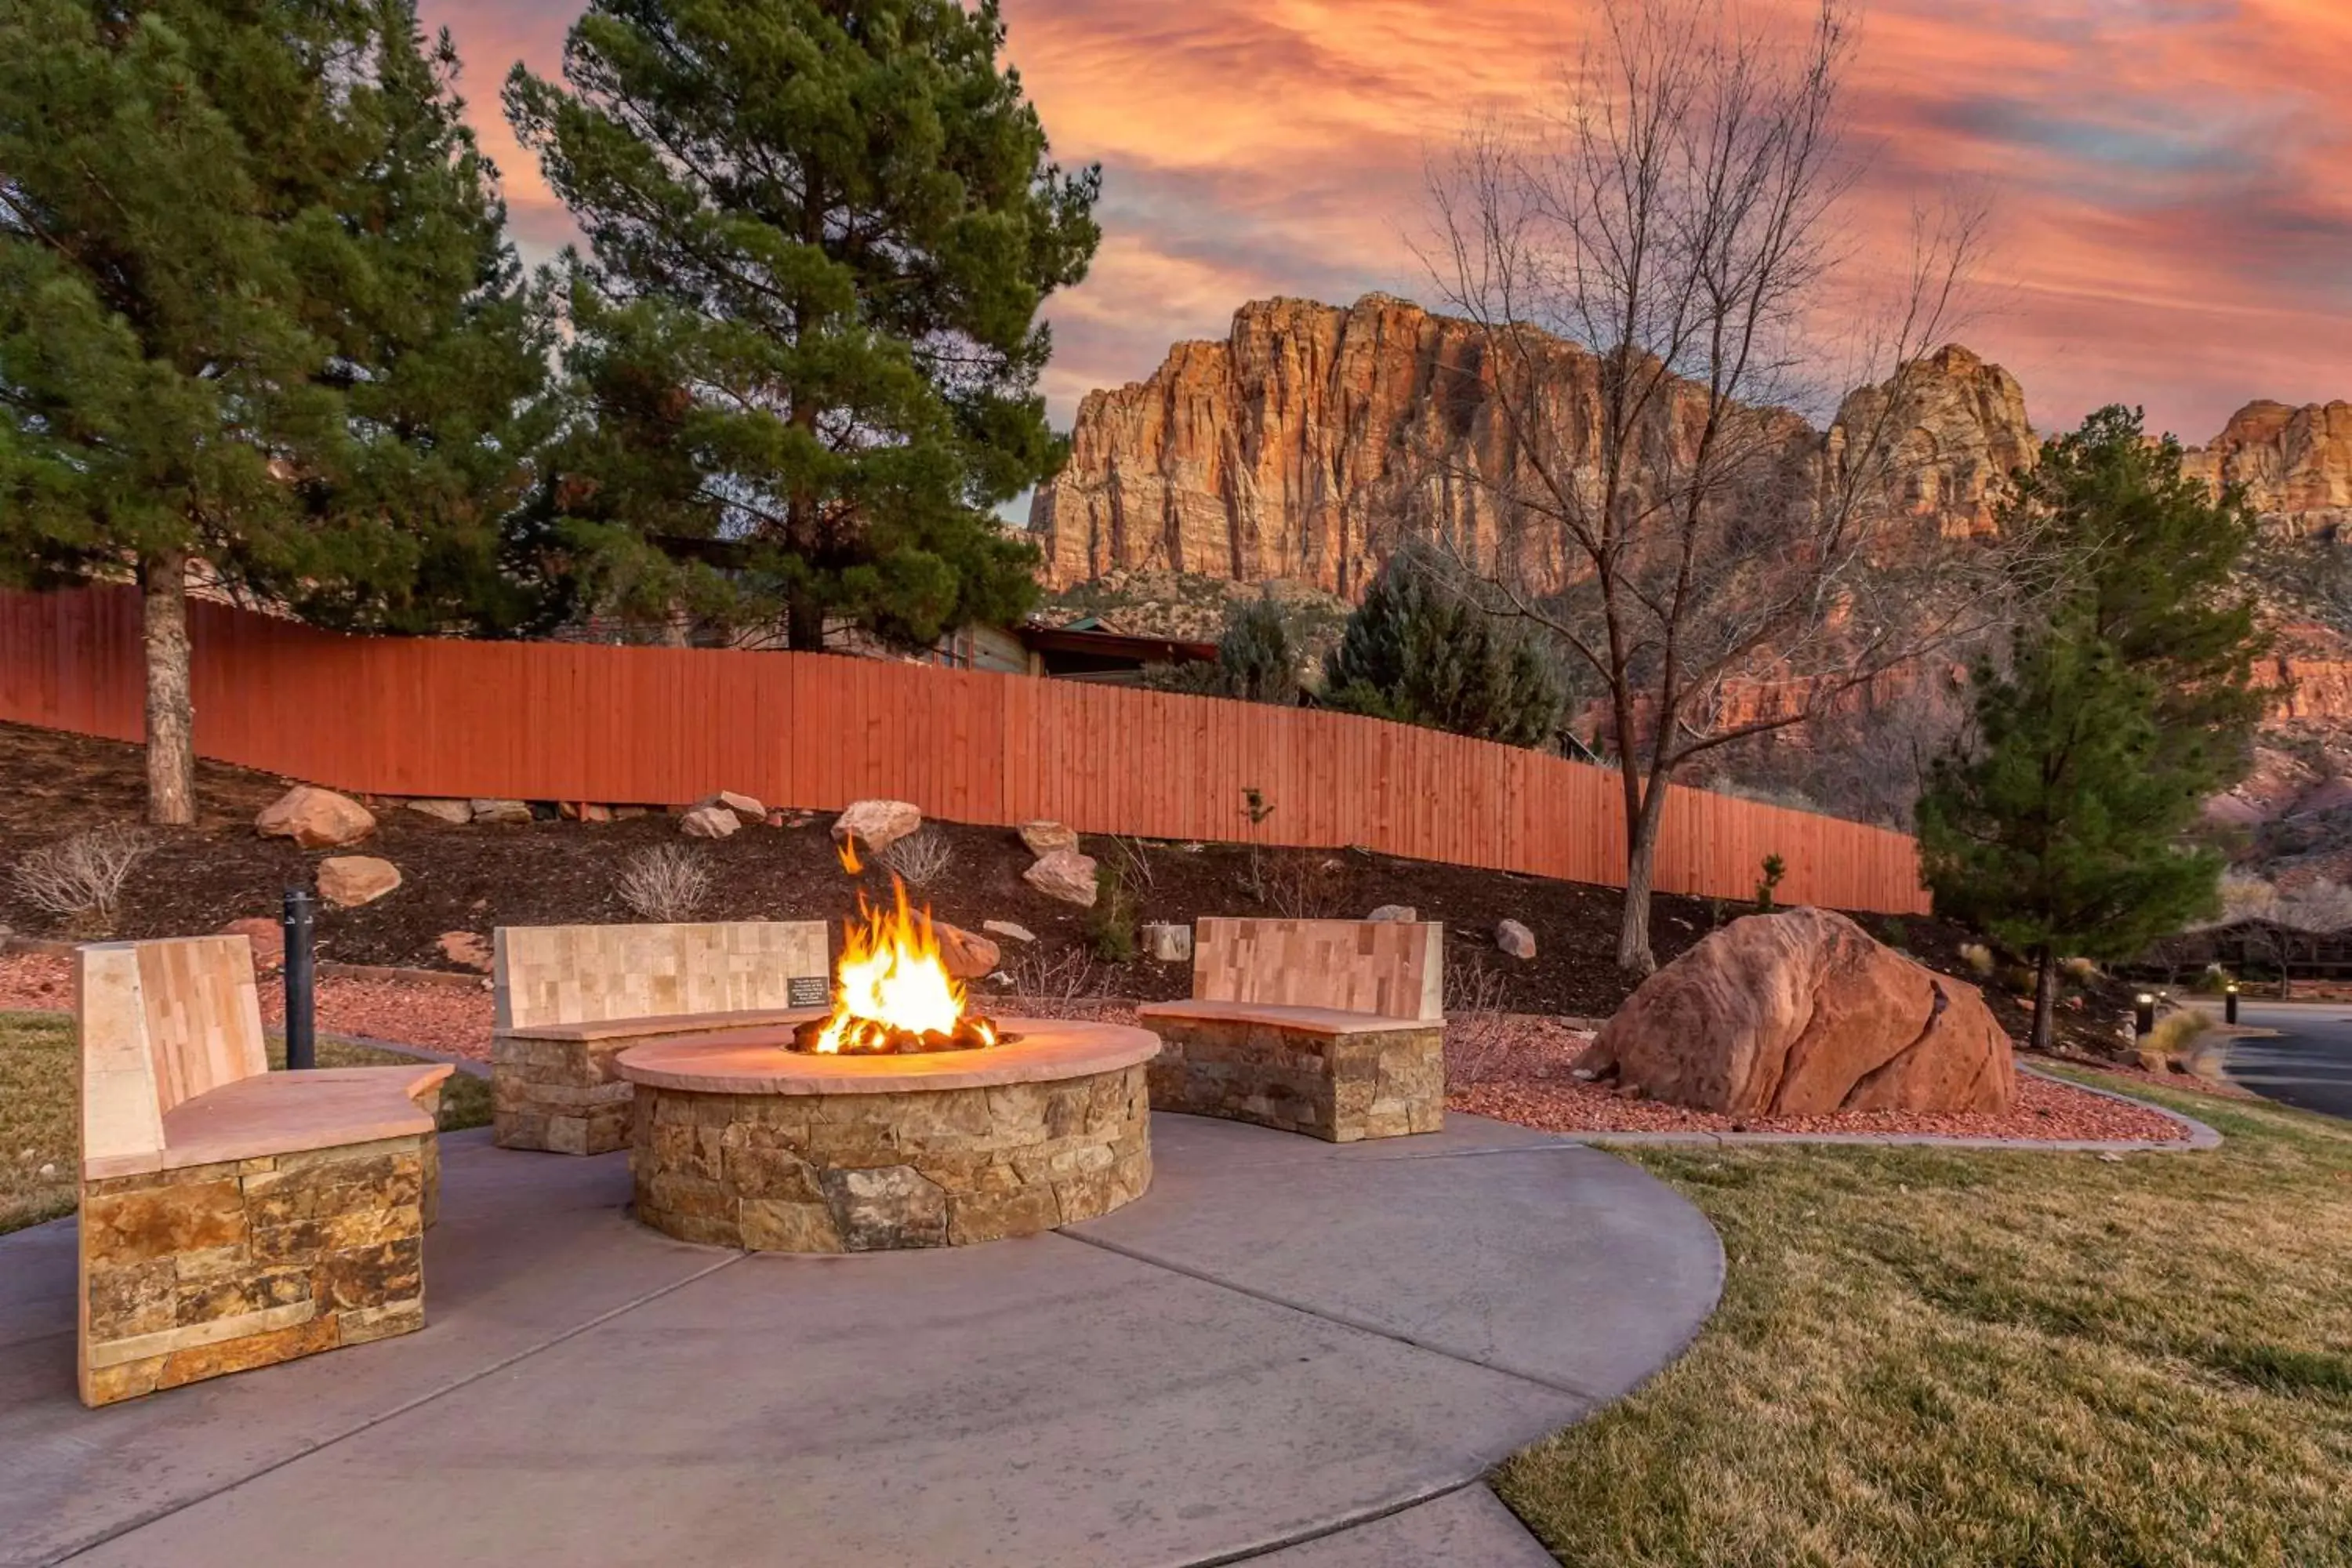 Property building in Best Western Plus Zion Canyon Inn & Suites